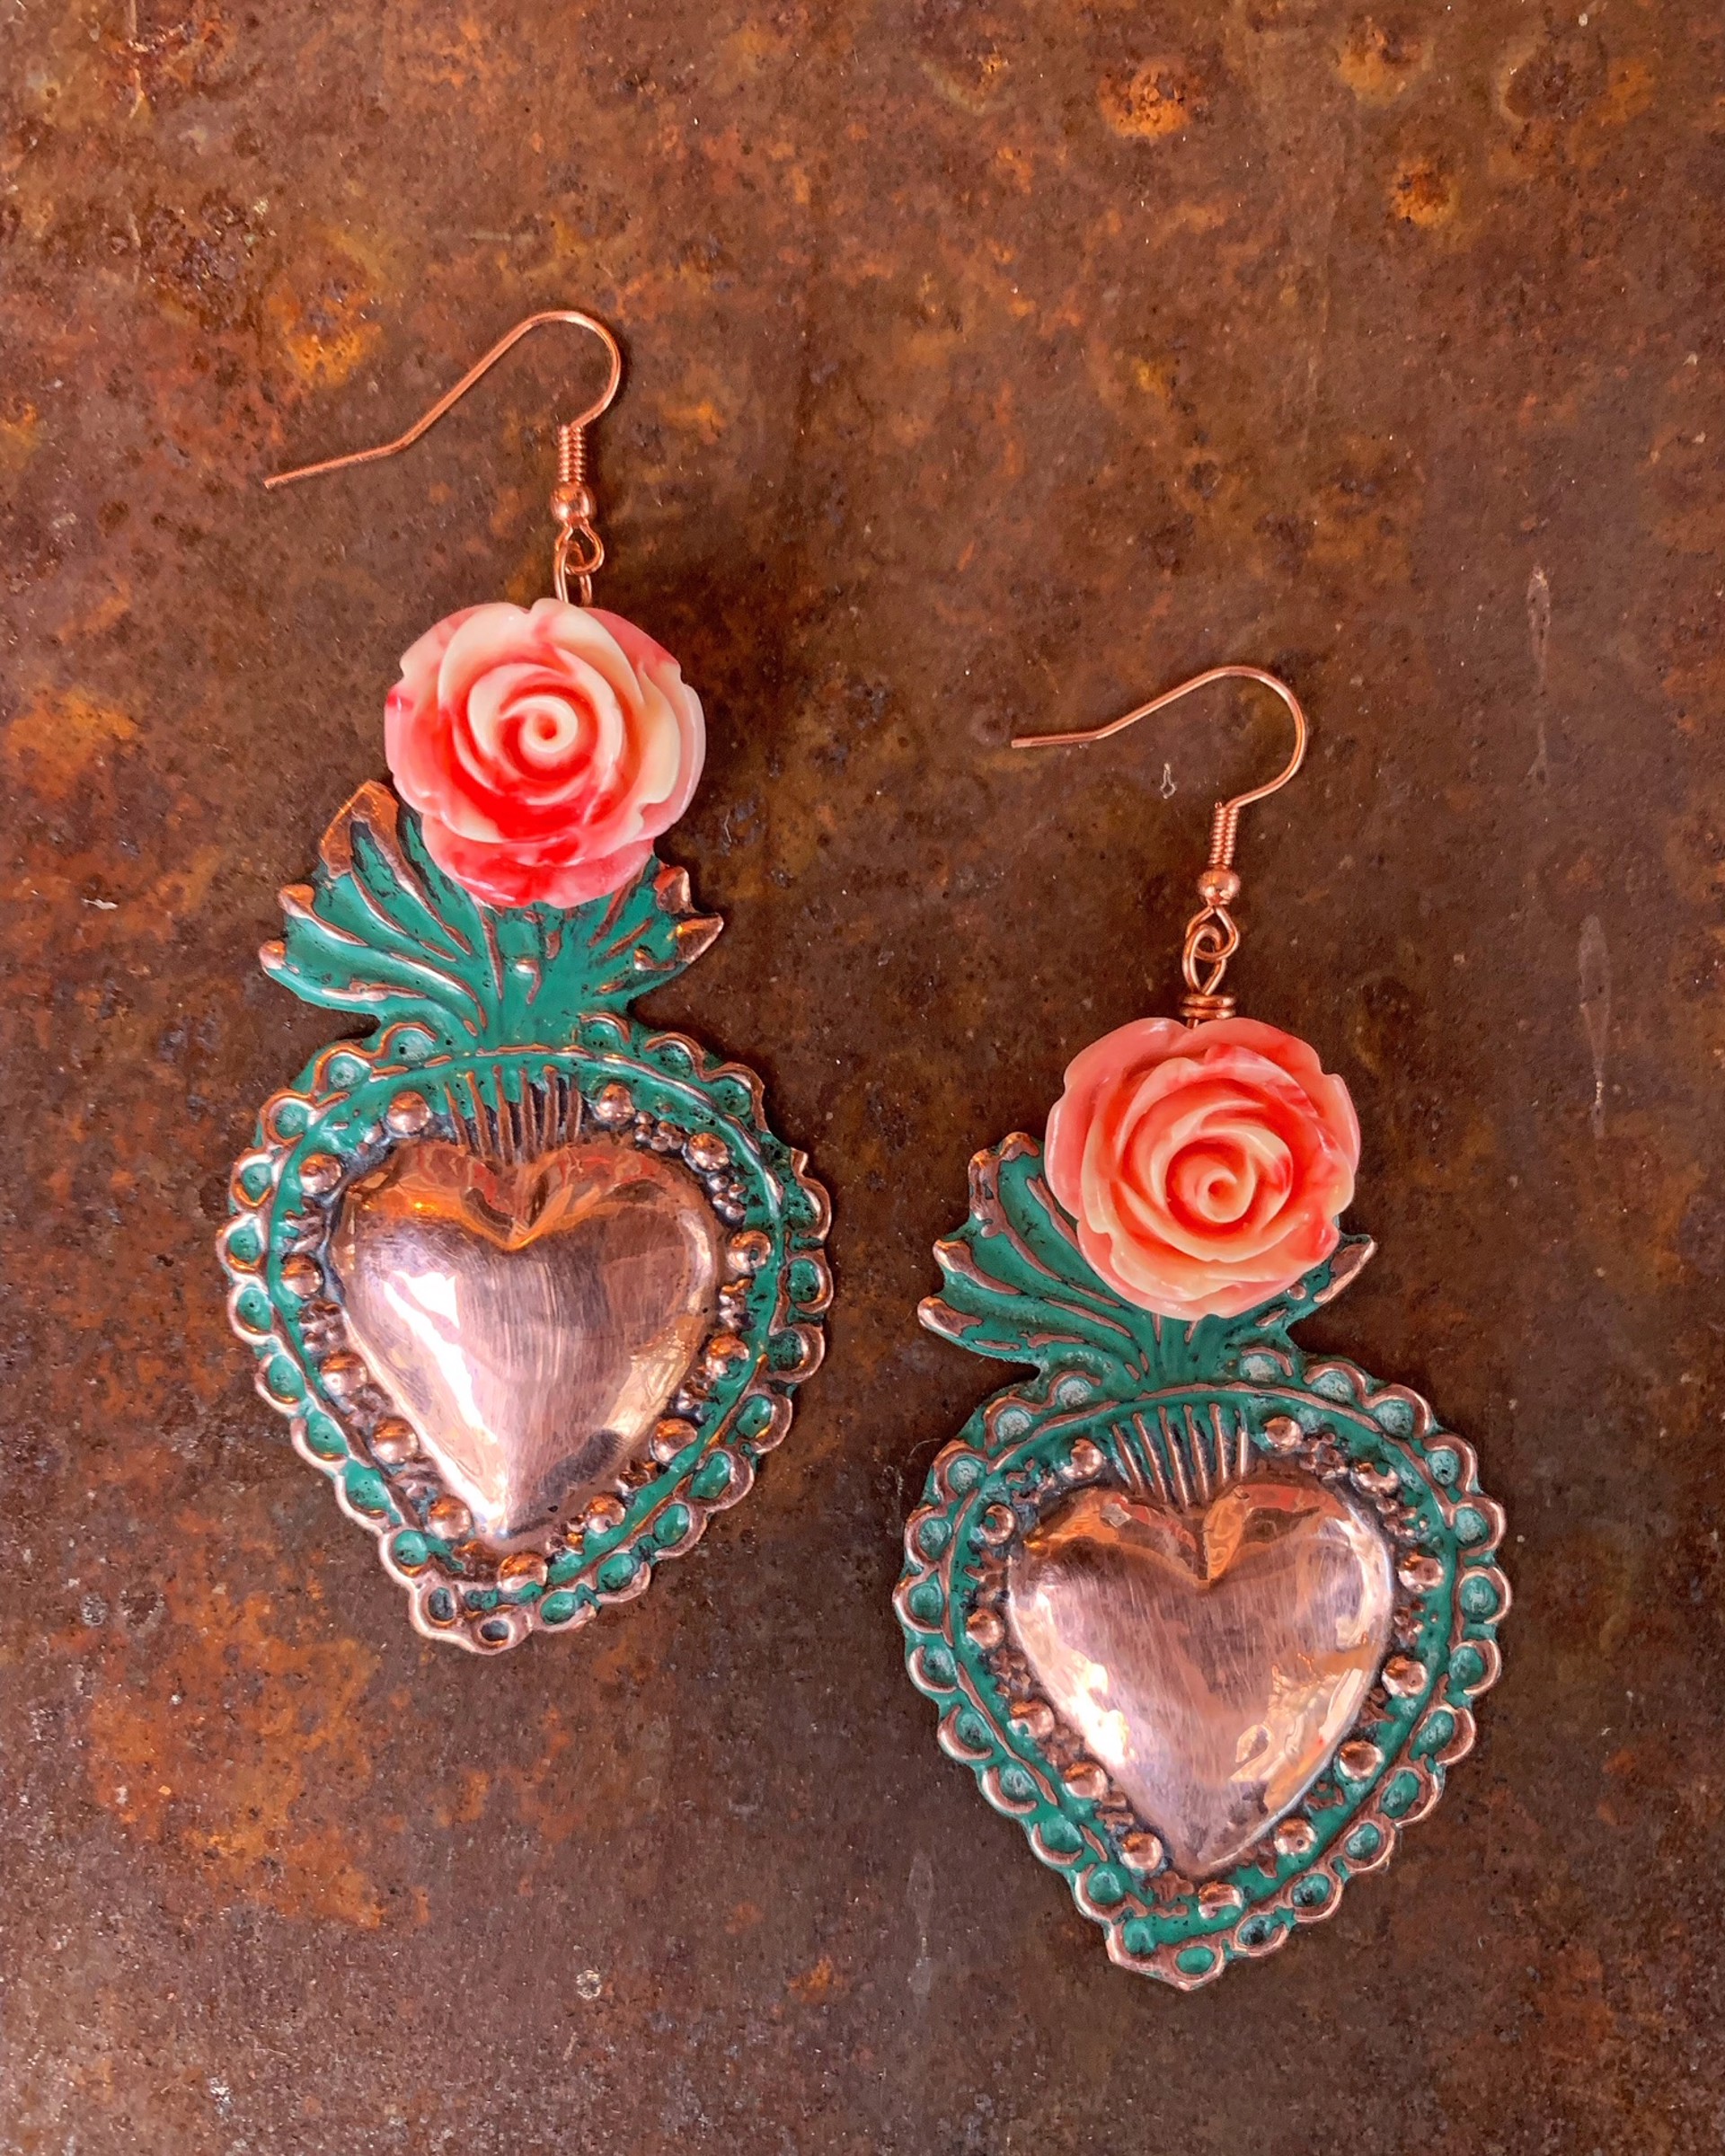 K784 Sacred Heart Earrings with Pink Roses by Kelly Ormsby